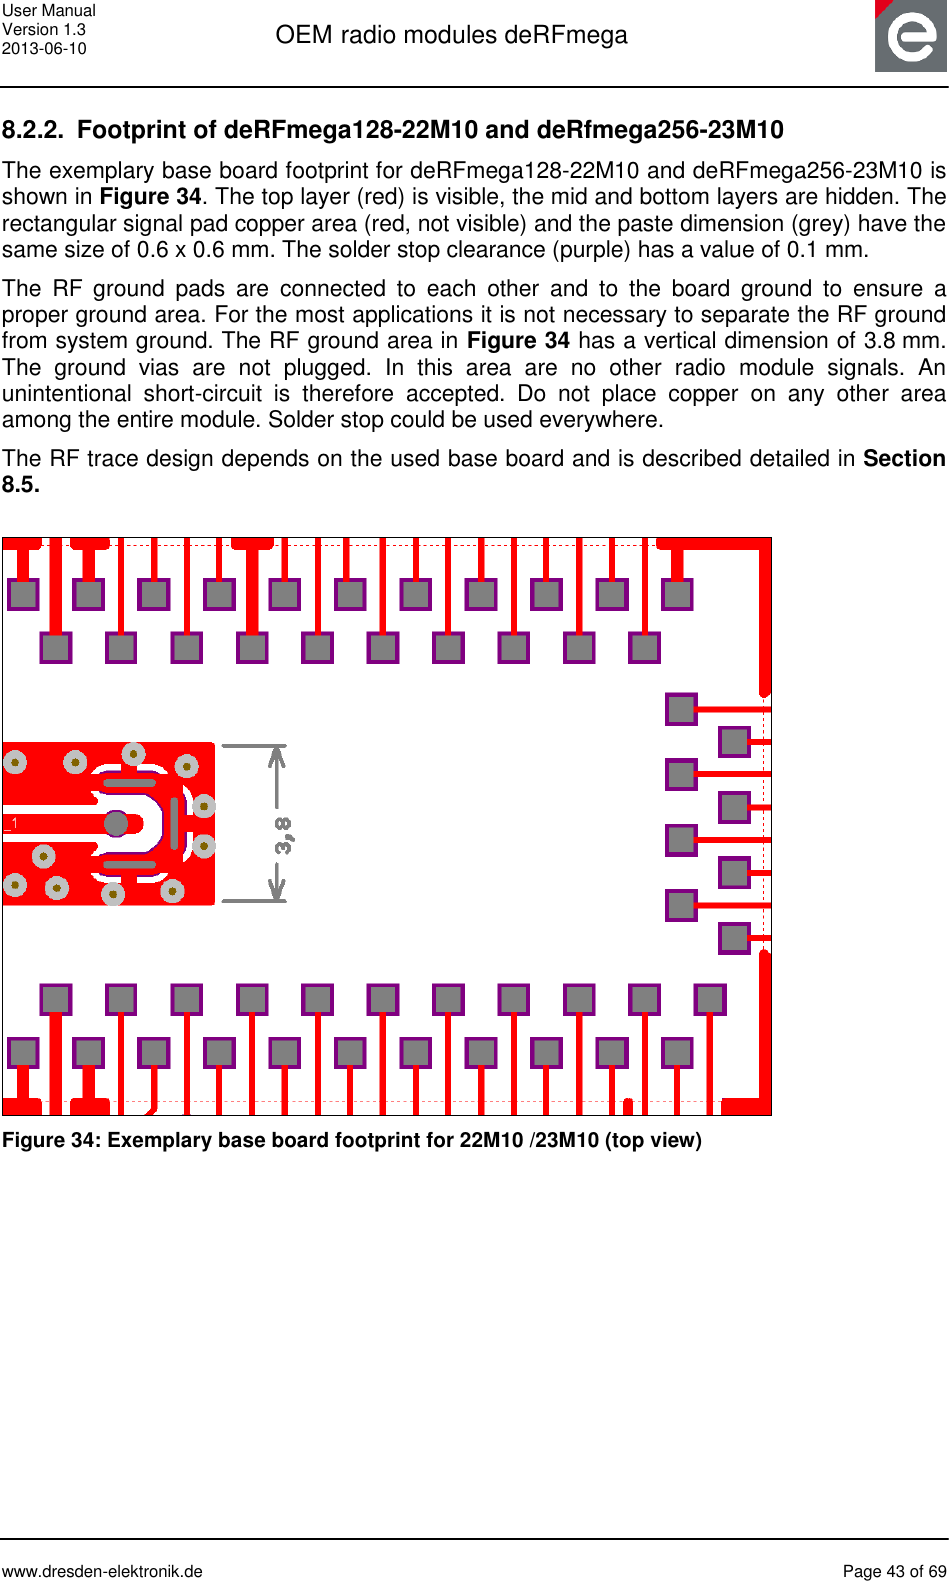 User Manual Version 1.3 2013-06-10  OEM radio modules deRFmega      www.dresden-elektronik.de  Page 43 of 69  8.2.2.  Footprint of deRFmega128-22M10 and deRfmega256-23M10 The exemplary base board footprint for deRFmega128-22M10 and deRFmega256-23M10 is shown in Figure 34. The top layer (red) is visible, the mid and bottom layers are hidden. The rectangular signal pad copper area (red, not visible) and the paste dimension (grey) have the same size of 0.6 x 0.6 mm. The solder stop clearance (purple) has a value of 0.1 mm.  The  RF  ground  pads  are  connected  to  each  other  and  to  the  board  ground  to  ensure  a proper ground area. For the most applications it is not necessary to separate the RF ground from system ground. The RF ground area in Figure 34 has a vertical dimension of 3.8 mm. The  ground  vias  are  not  plugged.  In  this  area  are  no  other  radio  module  signals.  An unintentional  short-circuit  is  therefore  accepted.  Do  not  place  copper  on  any  other  area among the entire module. Solder stop could be used everywhere. The RF trace design depends on the used base board and is described detailed in Section 8.5.   Figure 34: Exemplary base board footprint for 22M10 /23M10 (top view) 